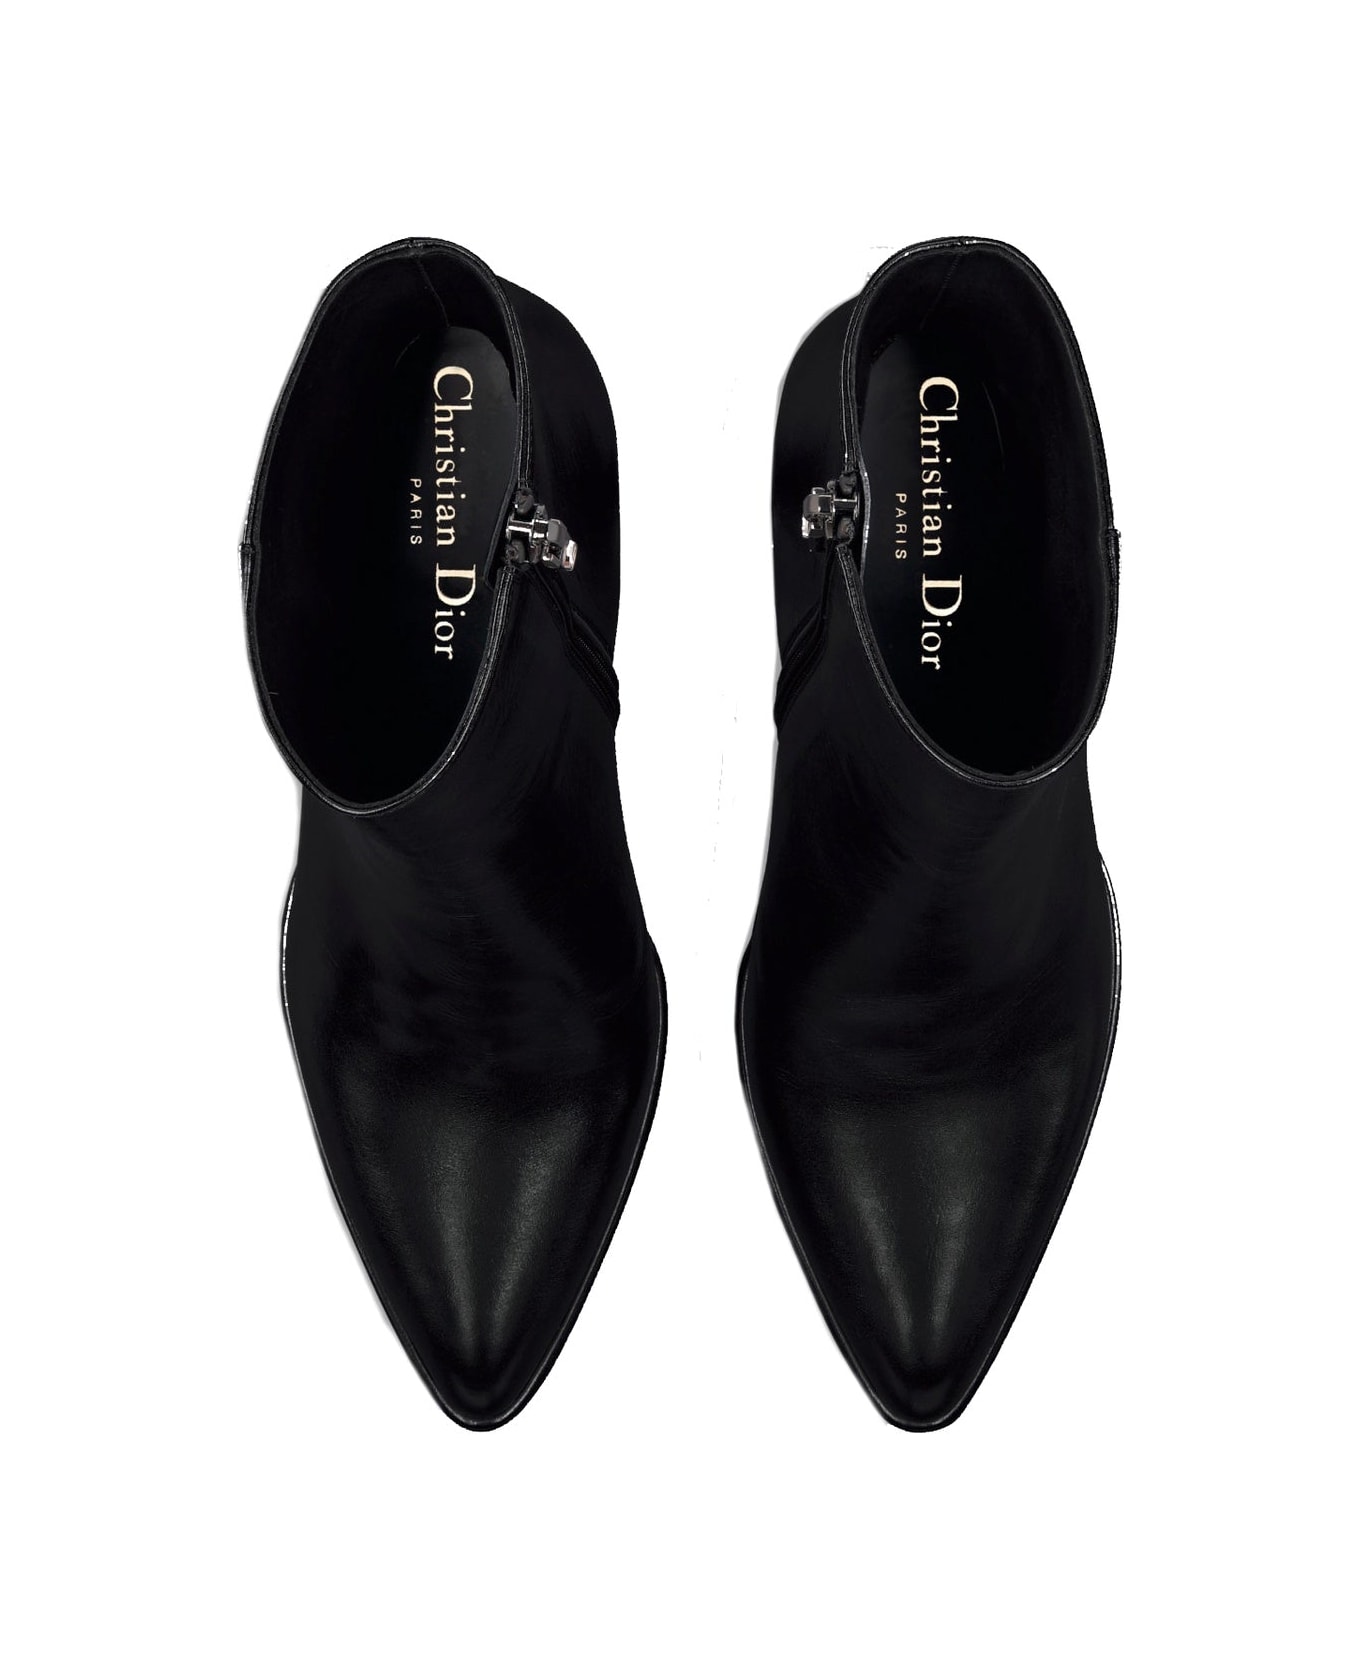 Dior D-fiction Ankle Boots - Black ブーツ